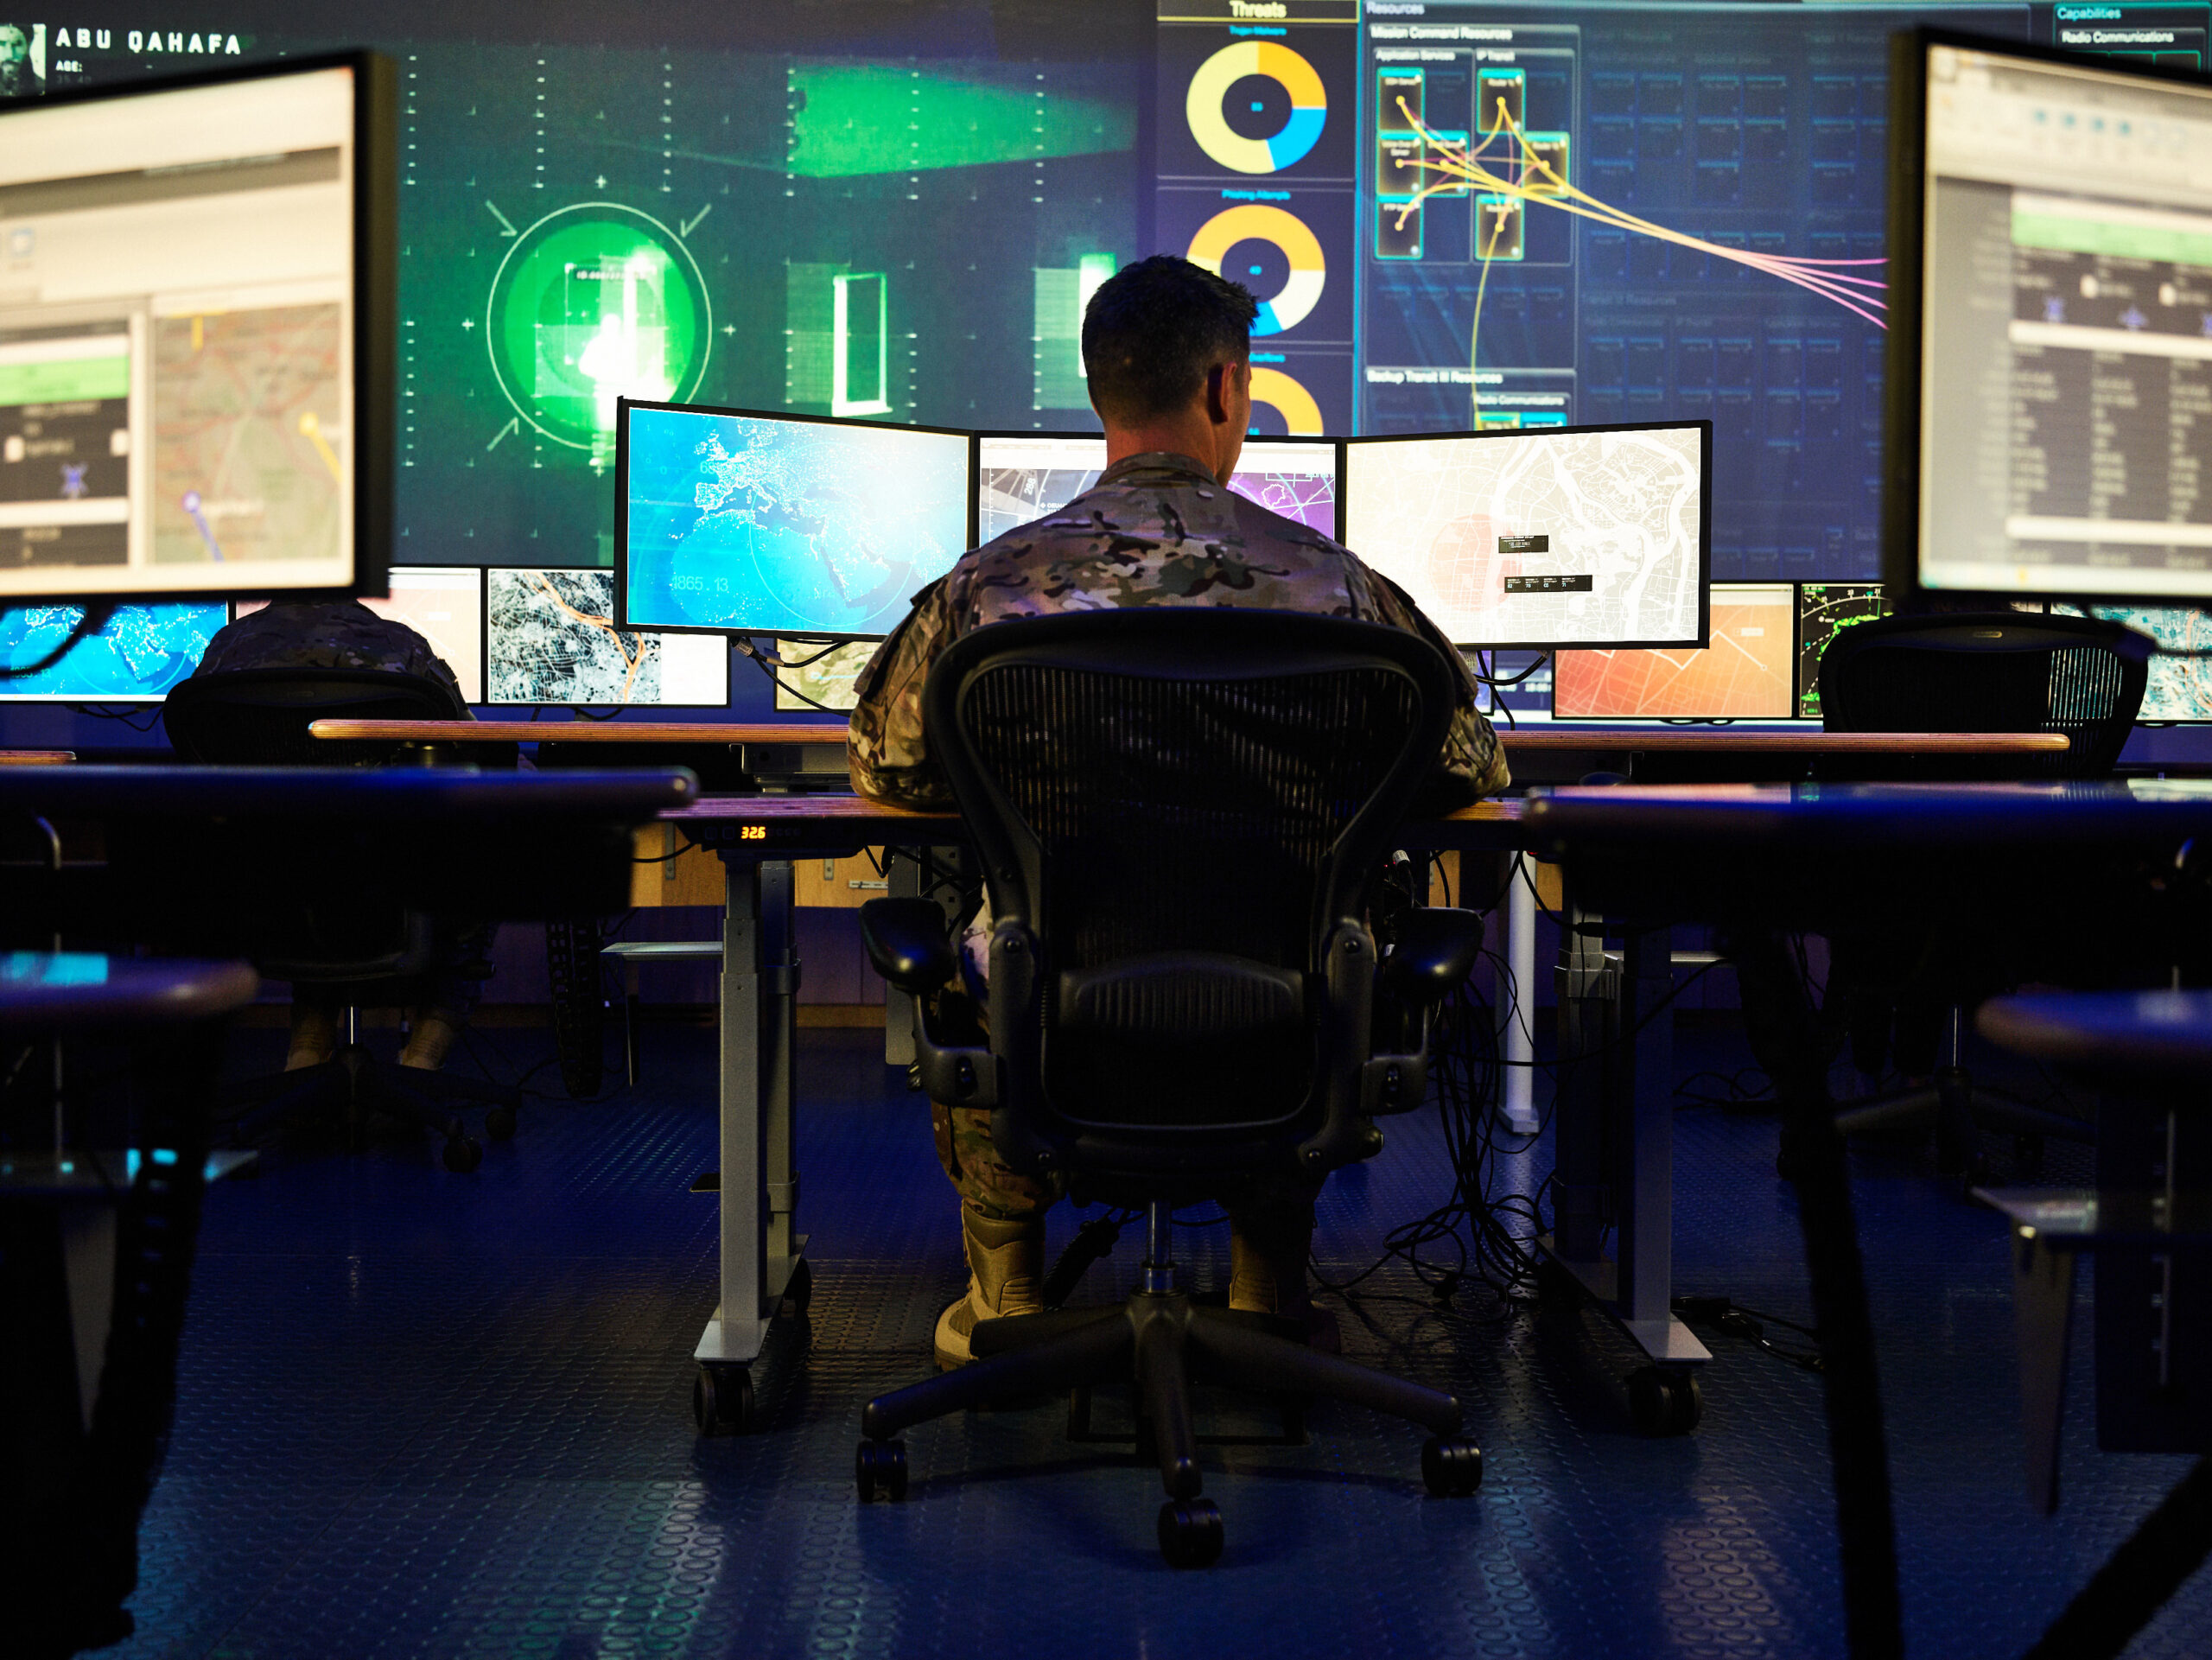 COMMAND CENTER_Control Room CYBER_CLISH_10_13_19_0548 Source